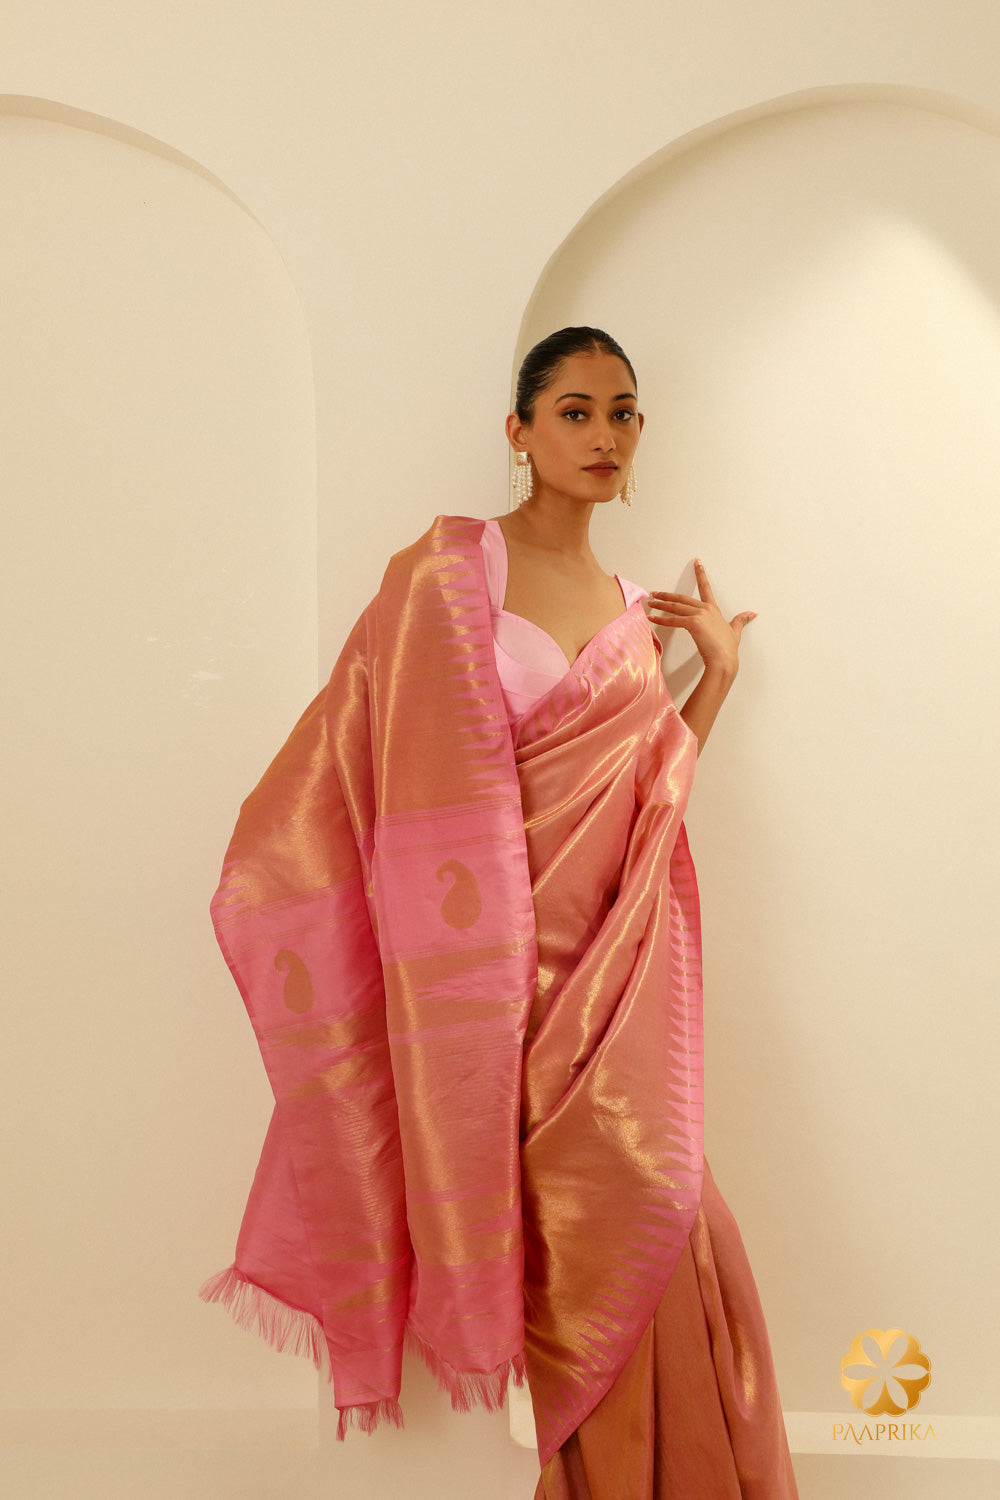 The entire Pastel Pink Kanjivaram Handwoven Saree displayed with a focus on its elegant design and cultural significance.